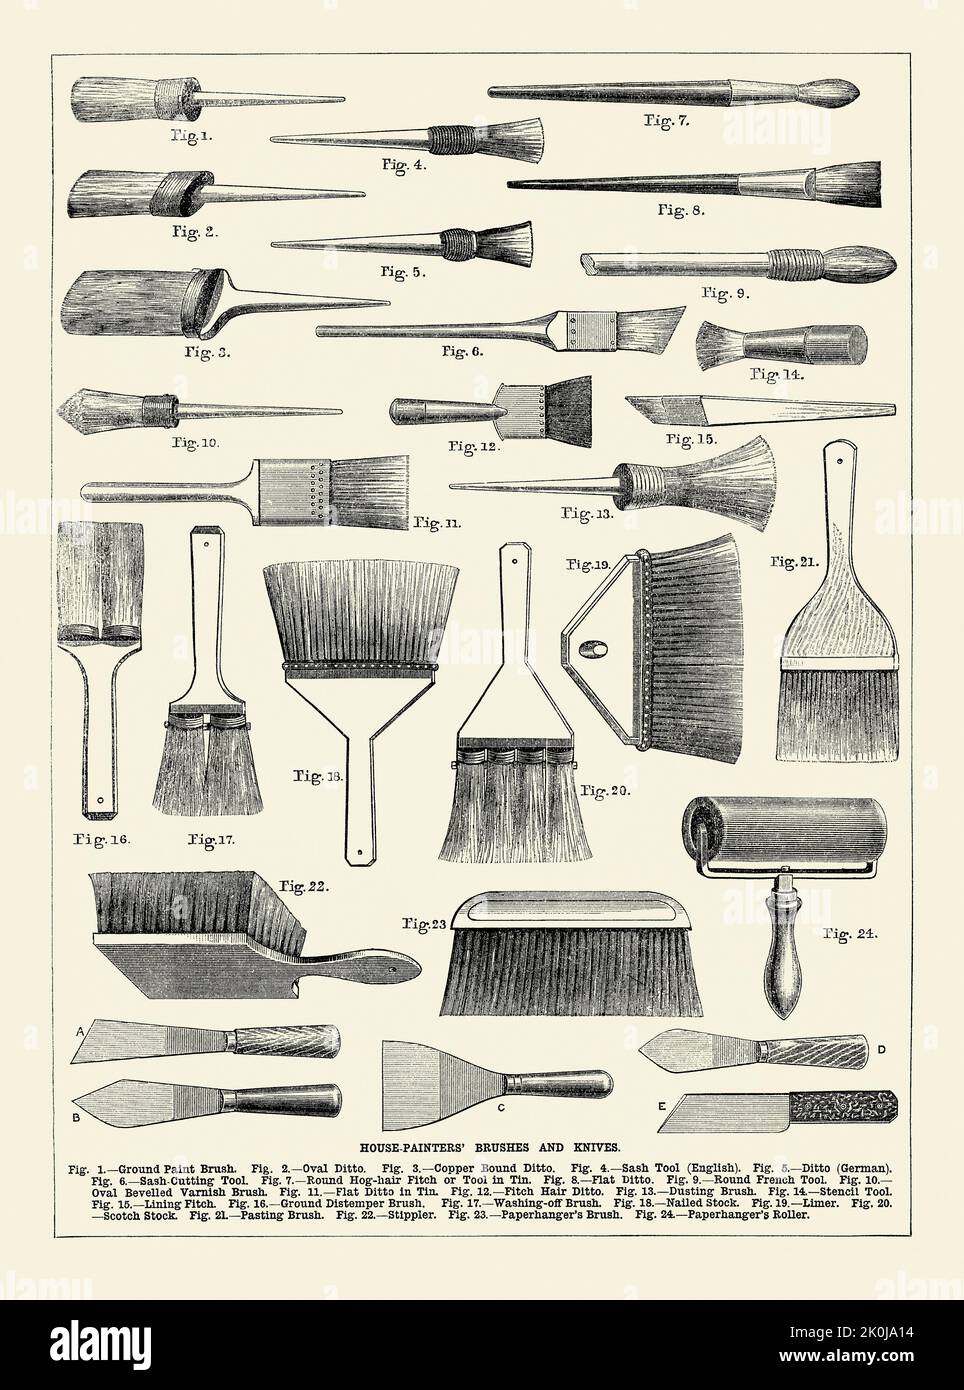 An old Victorian engraving of various brushes and knives used by painters and decorators during that era. It is from a book of 1890. Included are flat, oval and round paint brushes, specialist brushes for painting sash windows, brushes for varnishing and stencilling, plus brushes and rollers used for hanging wallpaper. Stock Photo